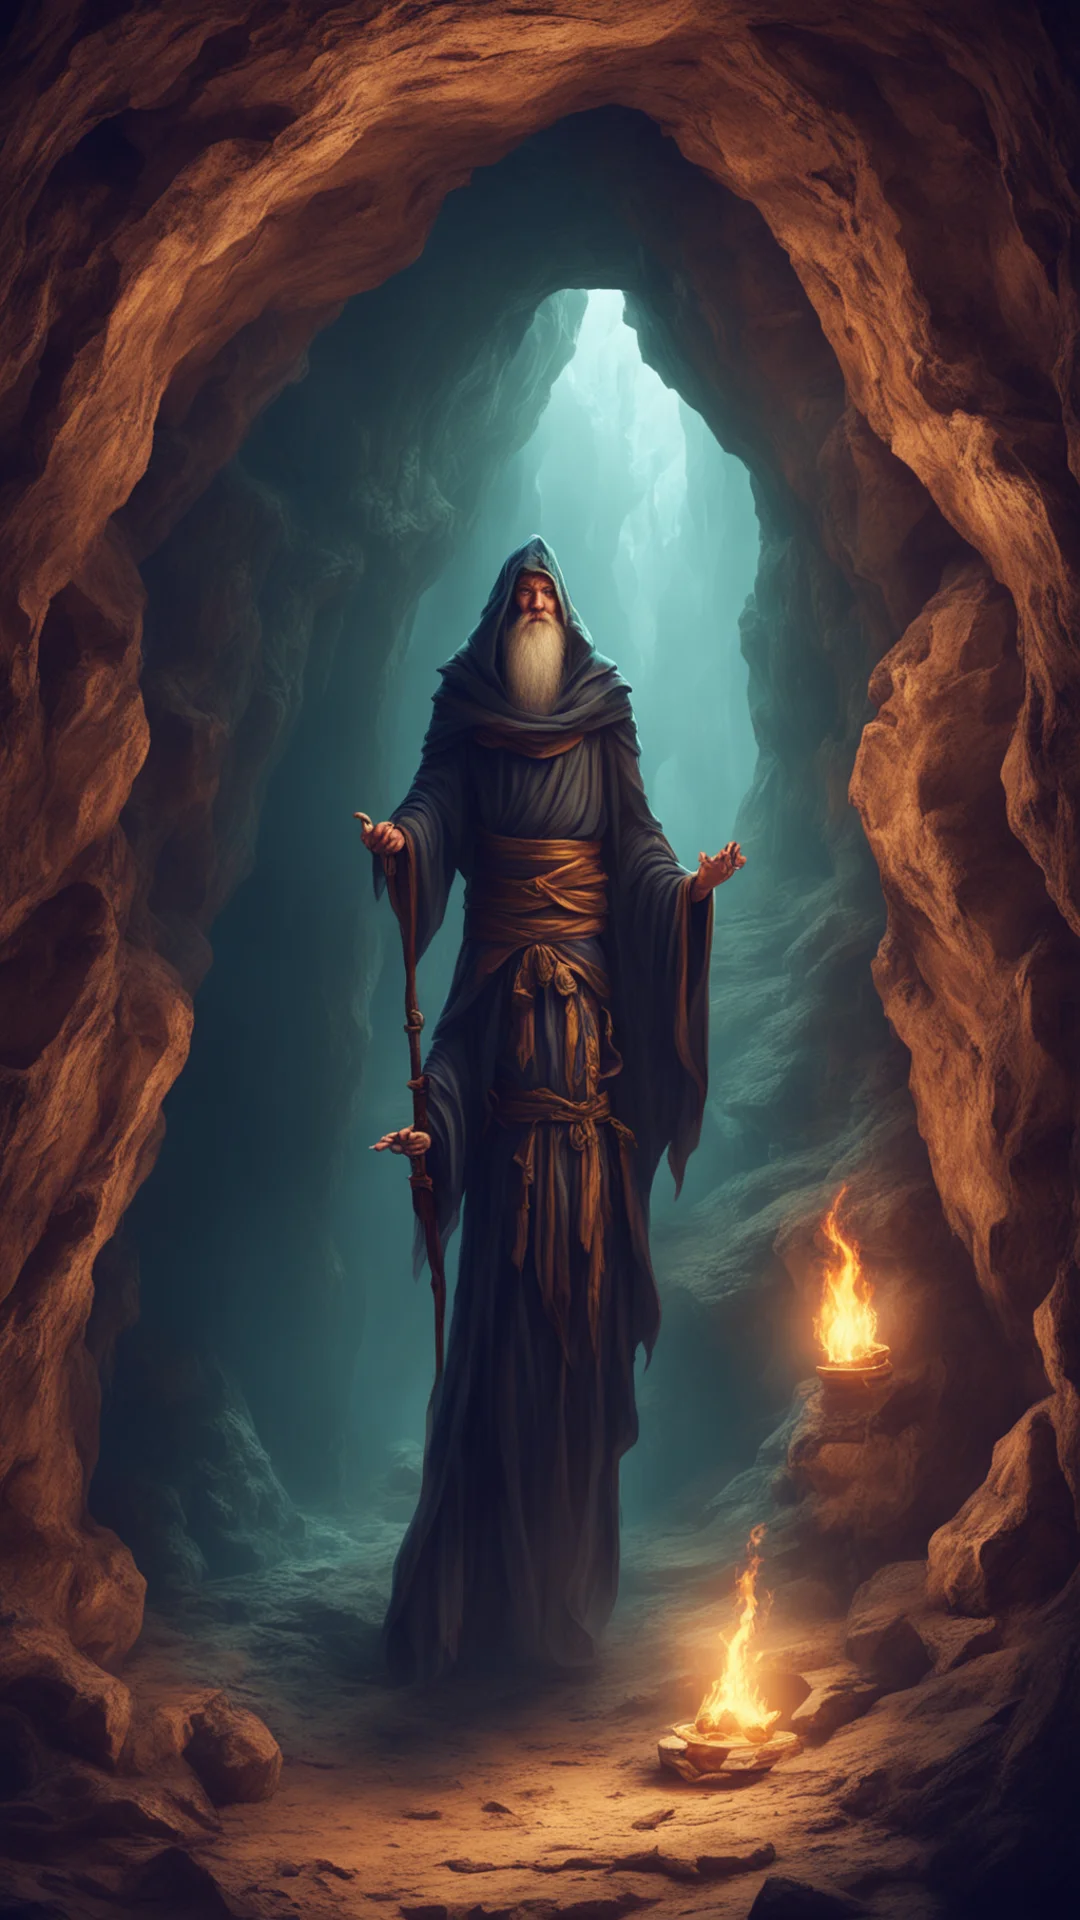 aiancient sorcerer into a cave amazing awesome portrait 2 tall